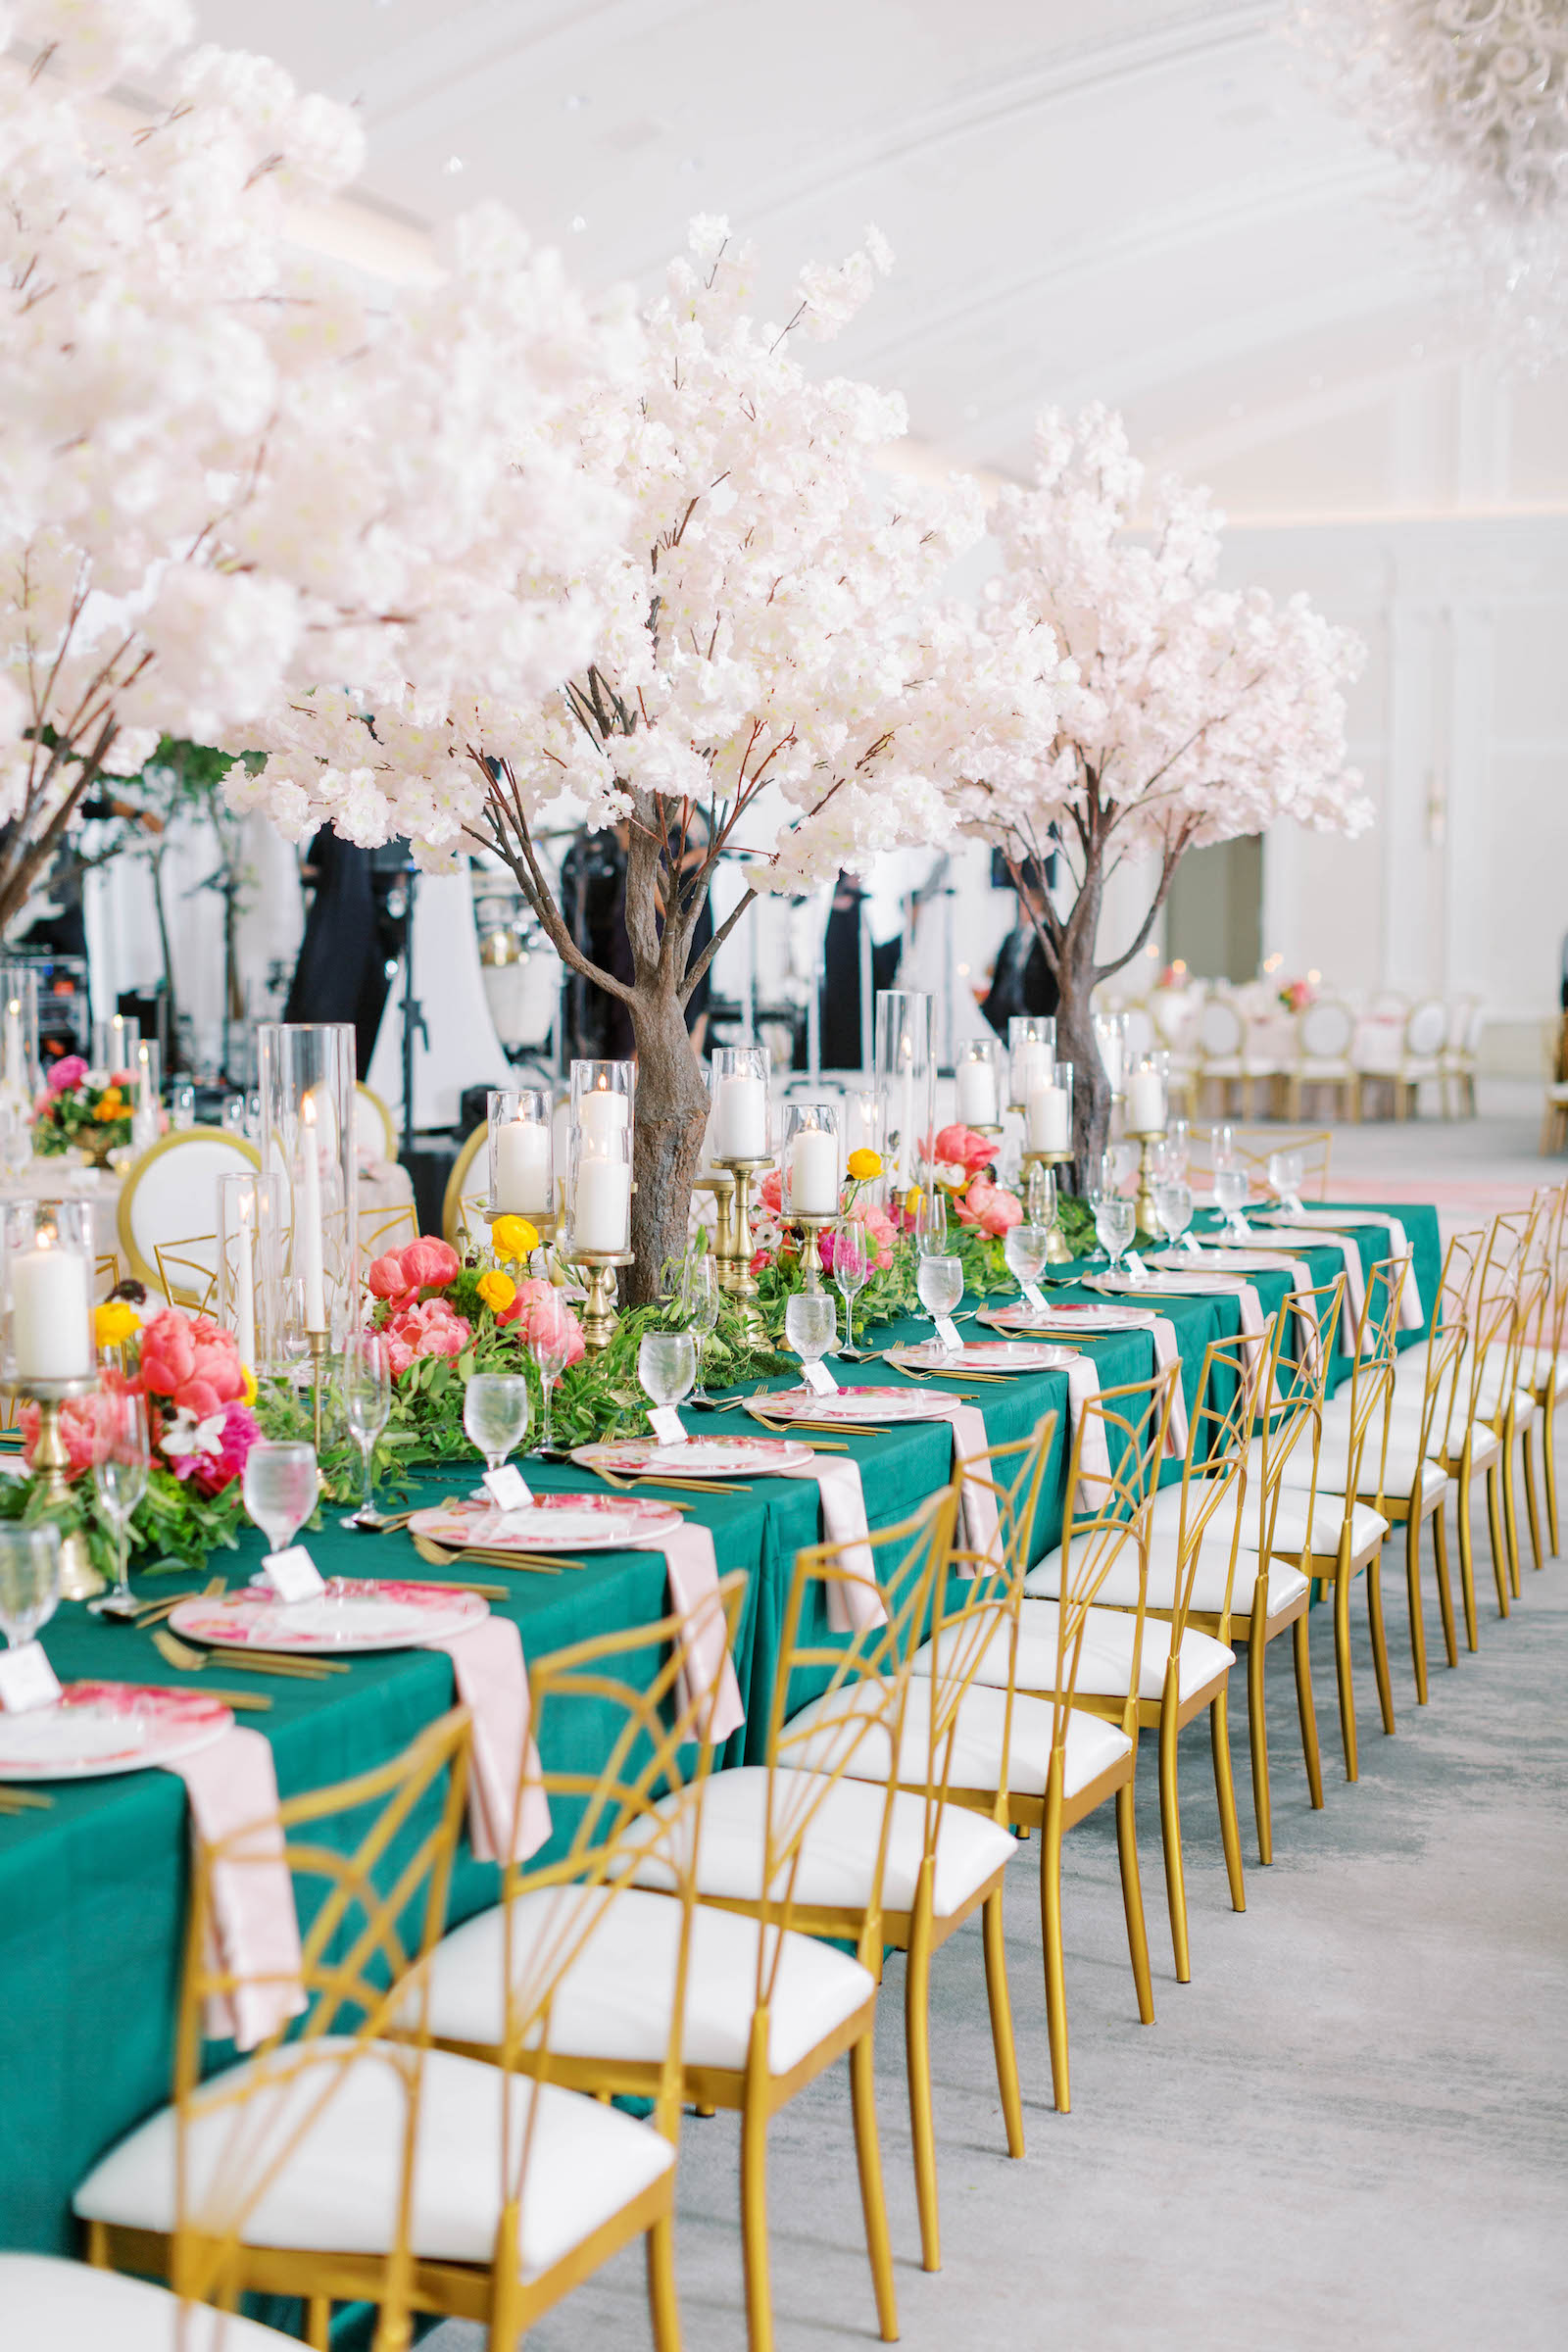 Floral Filled Wedding Reception with Teal Linens and Modern White and Gold Chairs | Cherry Blossom Tree Centerpieces | St. Petersburg Wedding Reception the Vinoy Renaissance | Planner Parties a la Carte